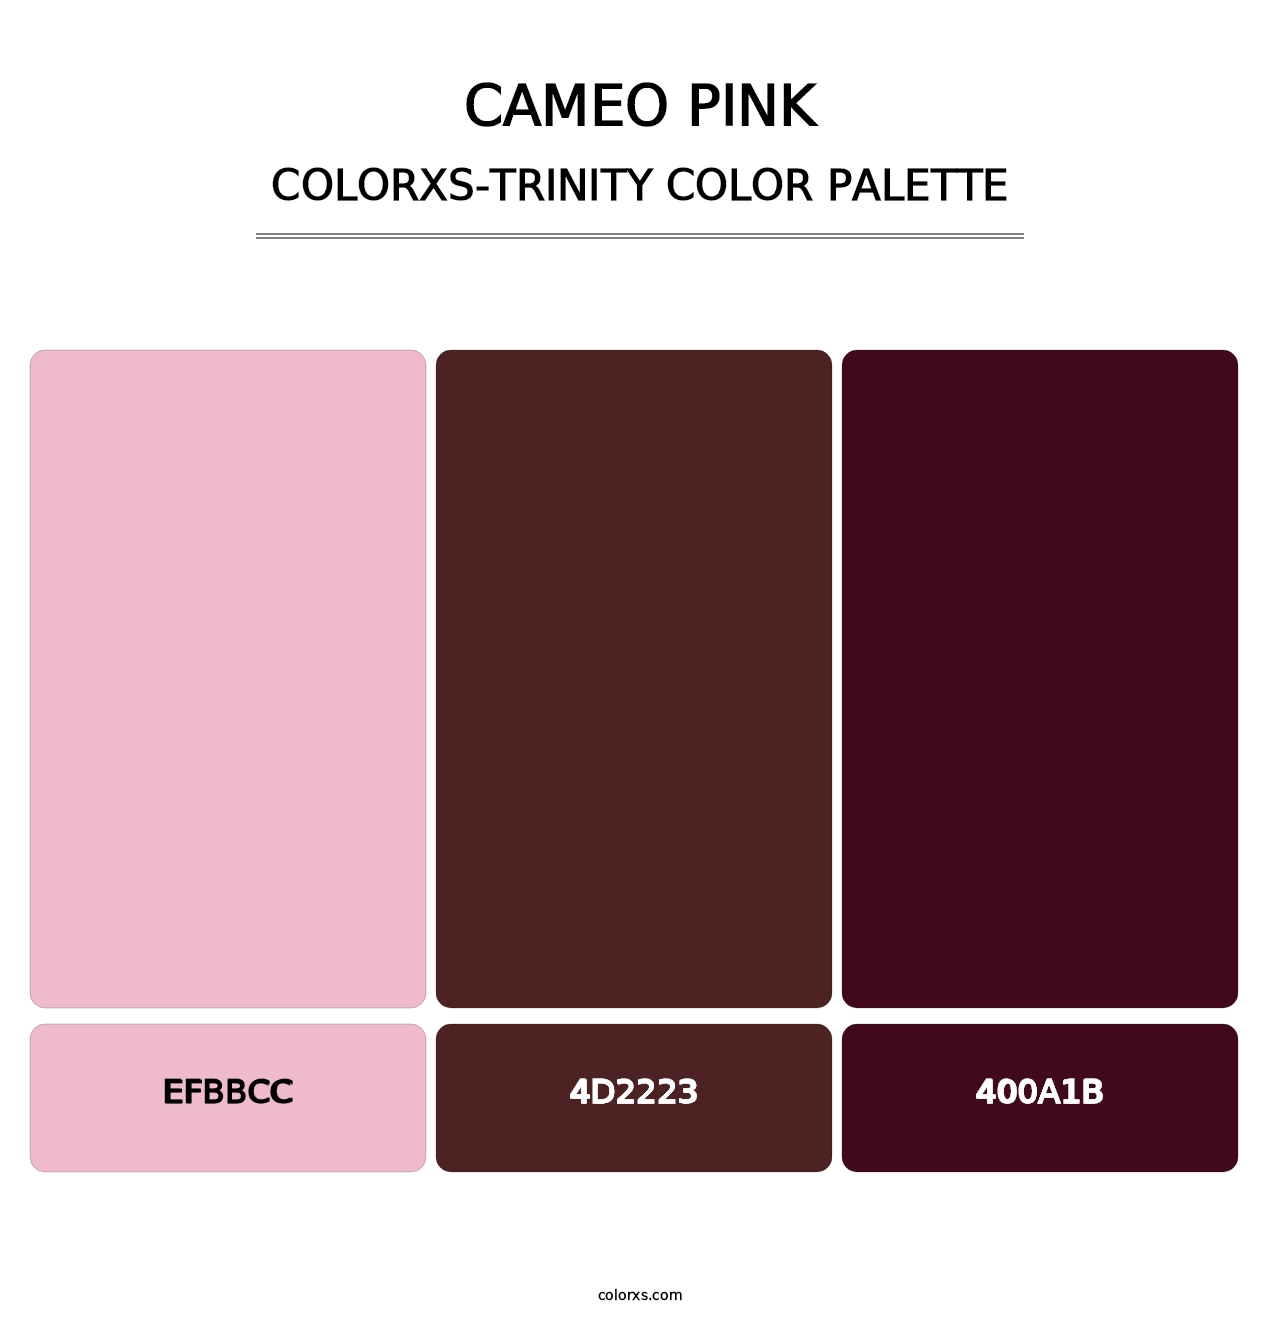 Cameo Pink - Colorxs Trinity Palette